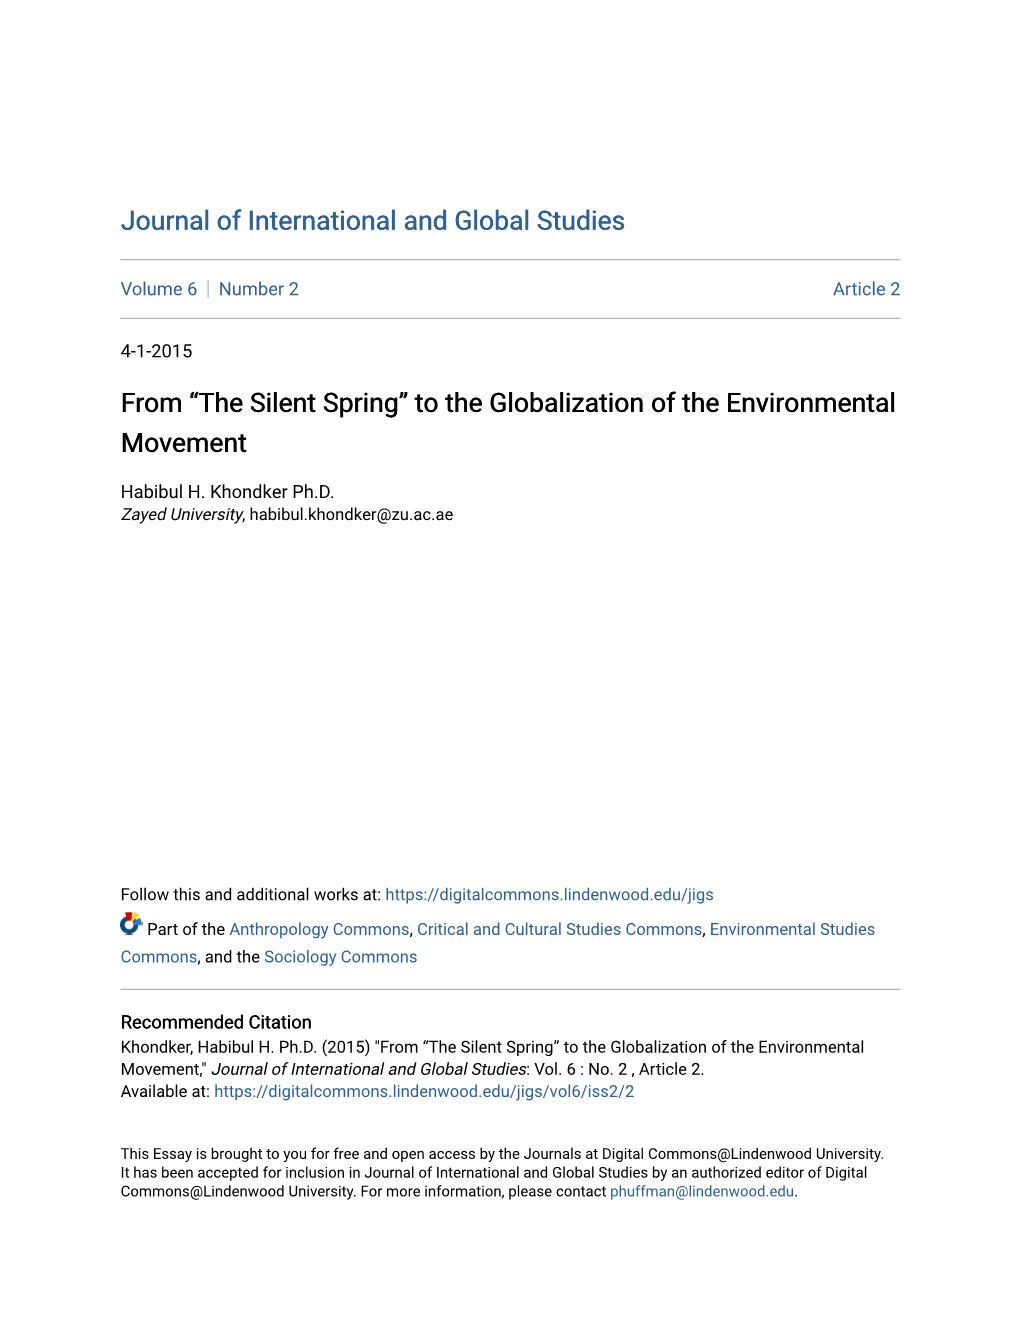 From “The Silent Spring” to the Globalization of the Environmental Movement